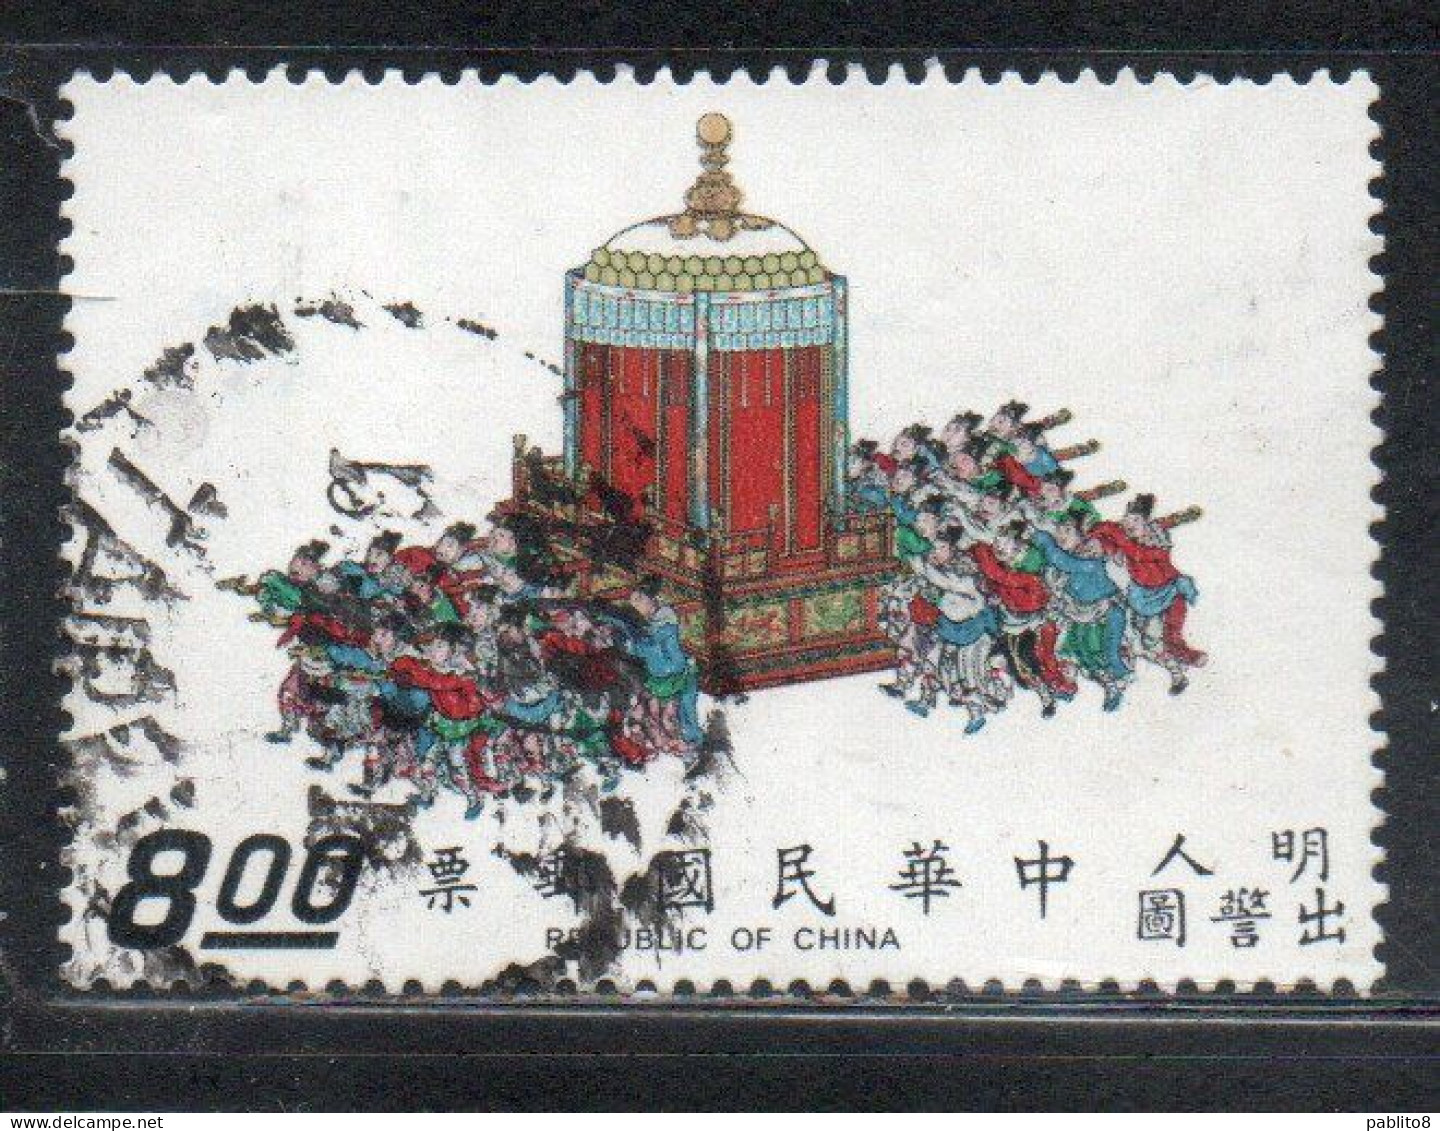 CHINA REPUBLIC CINA TAIWAN FORMOSA 1972 SCROLLS DEPICTING EMPEROR SHIH-TSUNG'S SEDAN CHAIR CARRIED BY 28 ME8$ USED USATO - Gebraucht